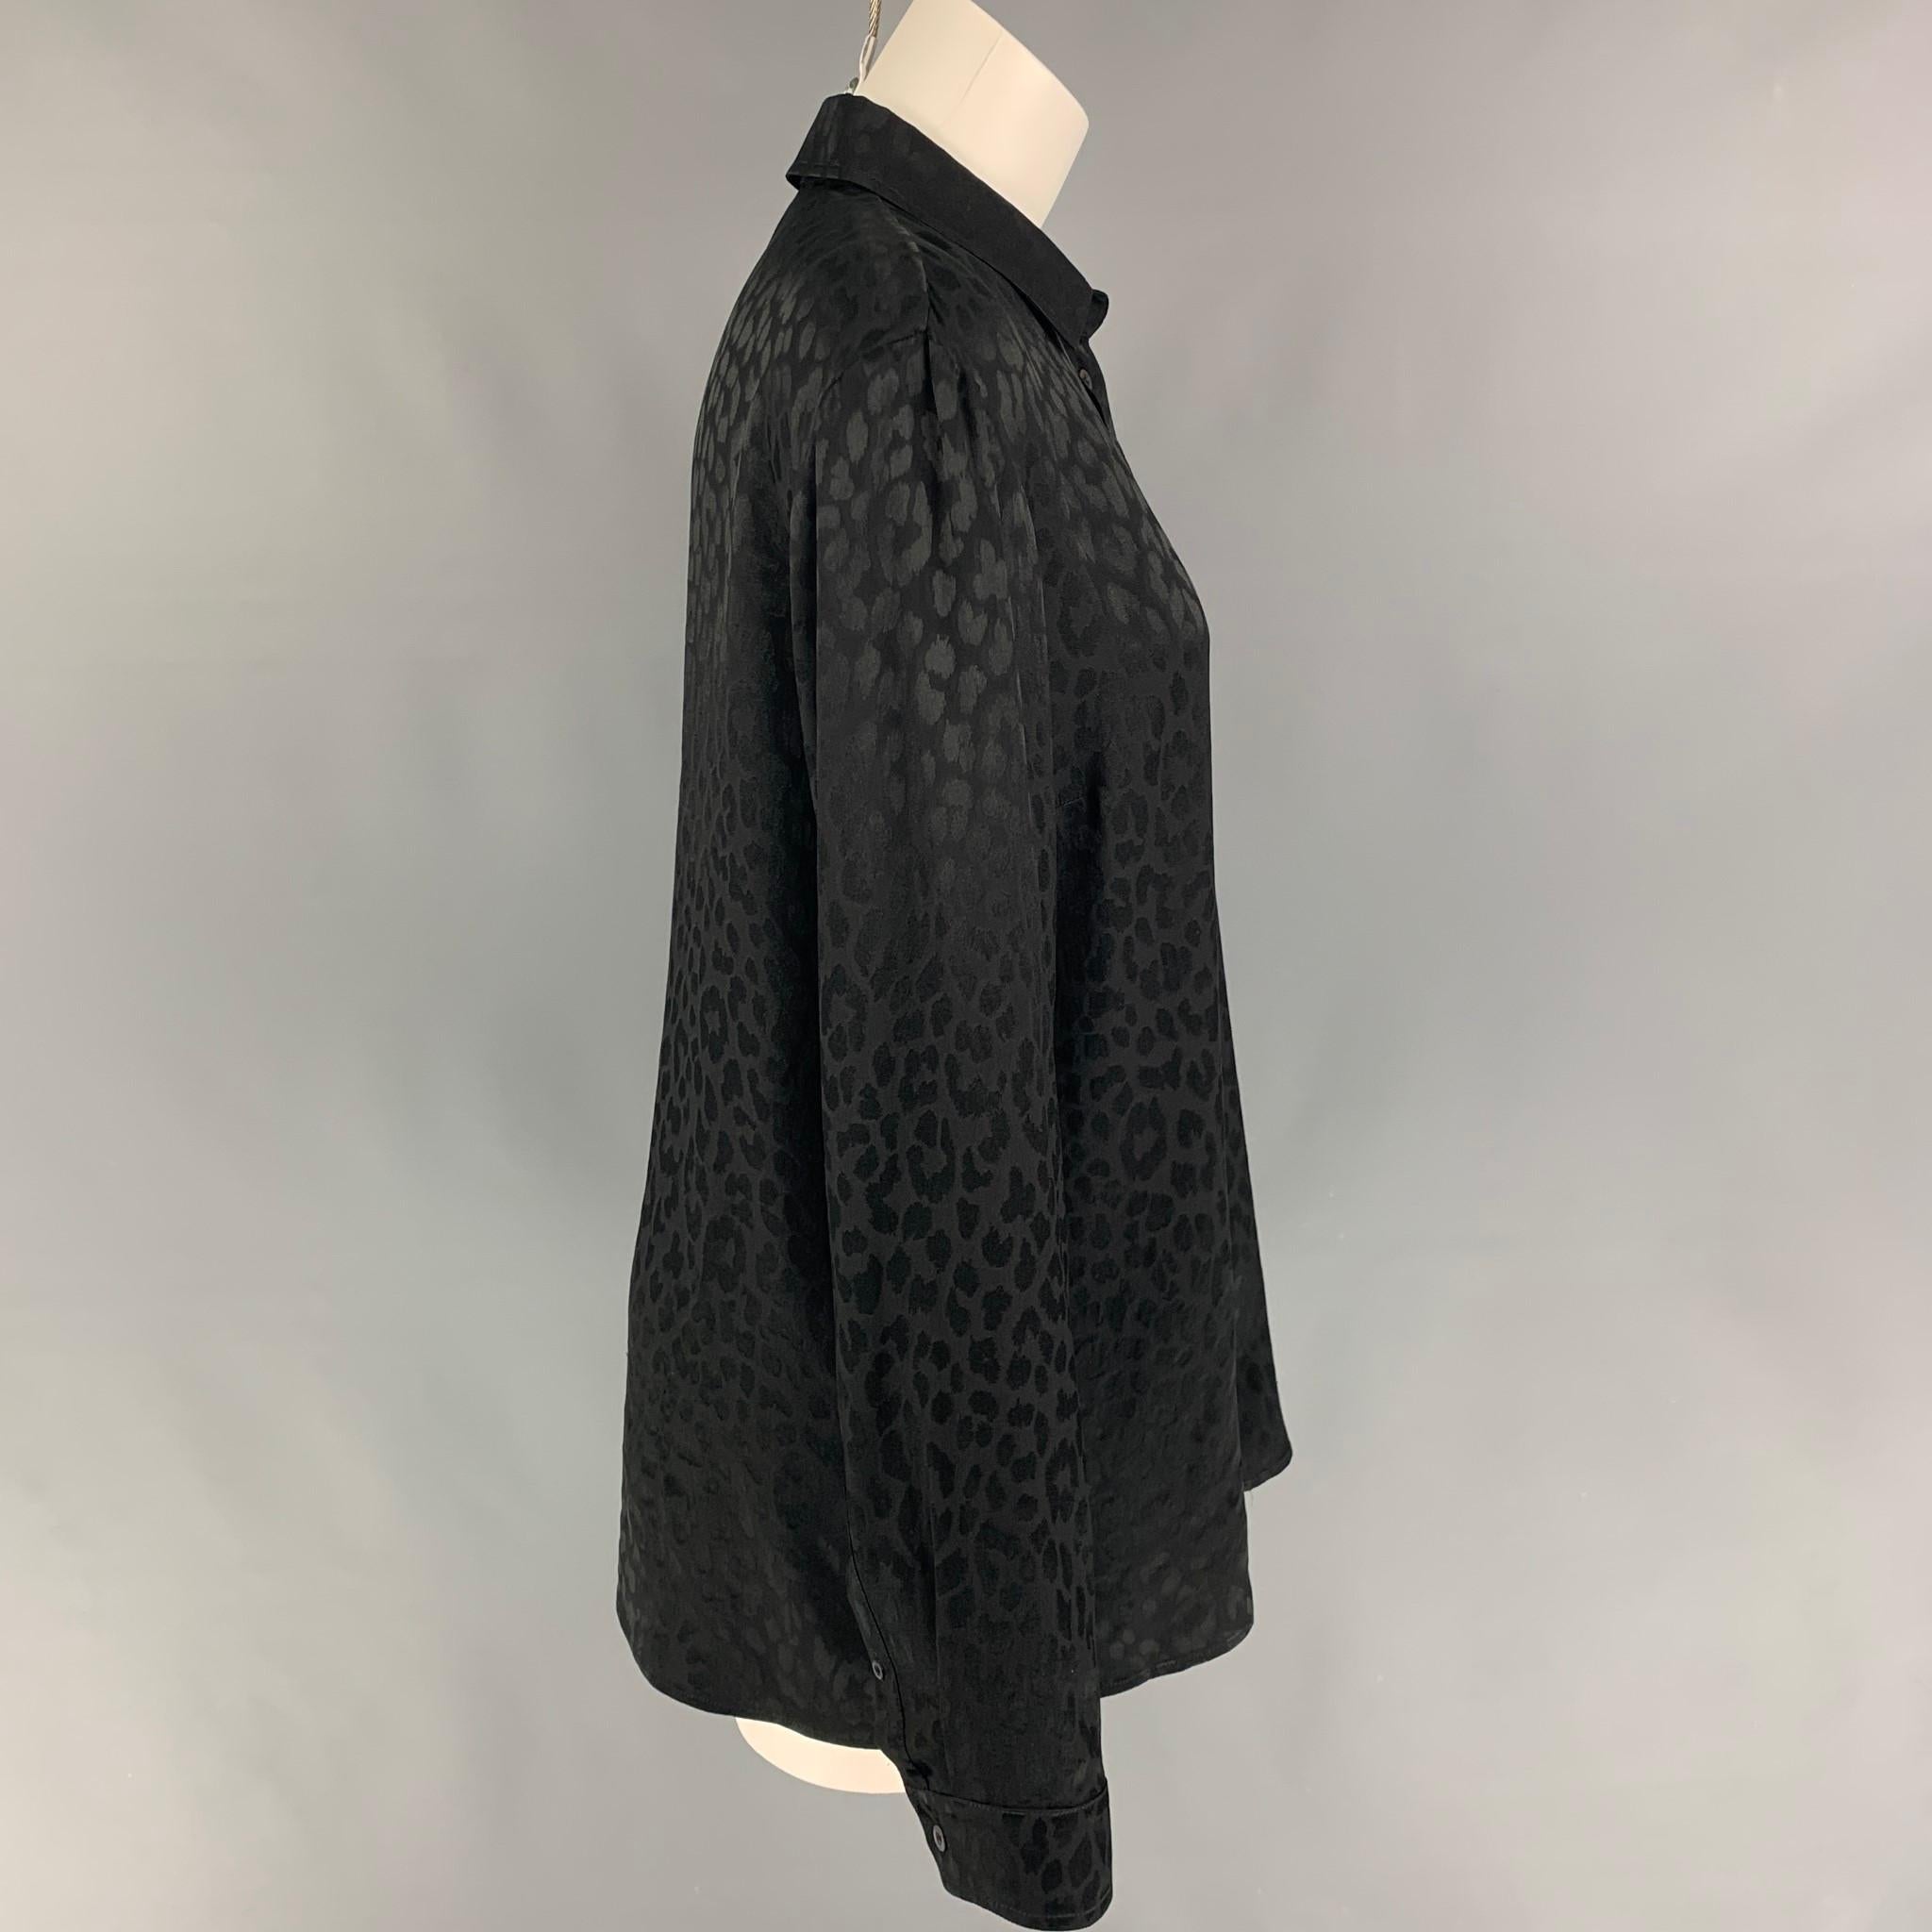 GUCCI shirt comes in a black animal print silk featuring a classic style, loose fit, spread collar, and a buttoned closure. Made in Italy. 

Excellent Pre-Owned Condition.
Marked: 48

Measurements:

Shoulder: 17.5 in.
Bust: 42 in.
Sleeve: 25.5